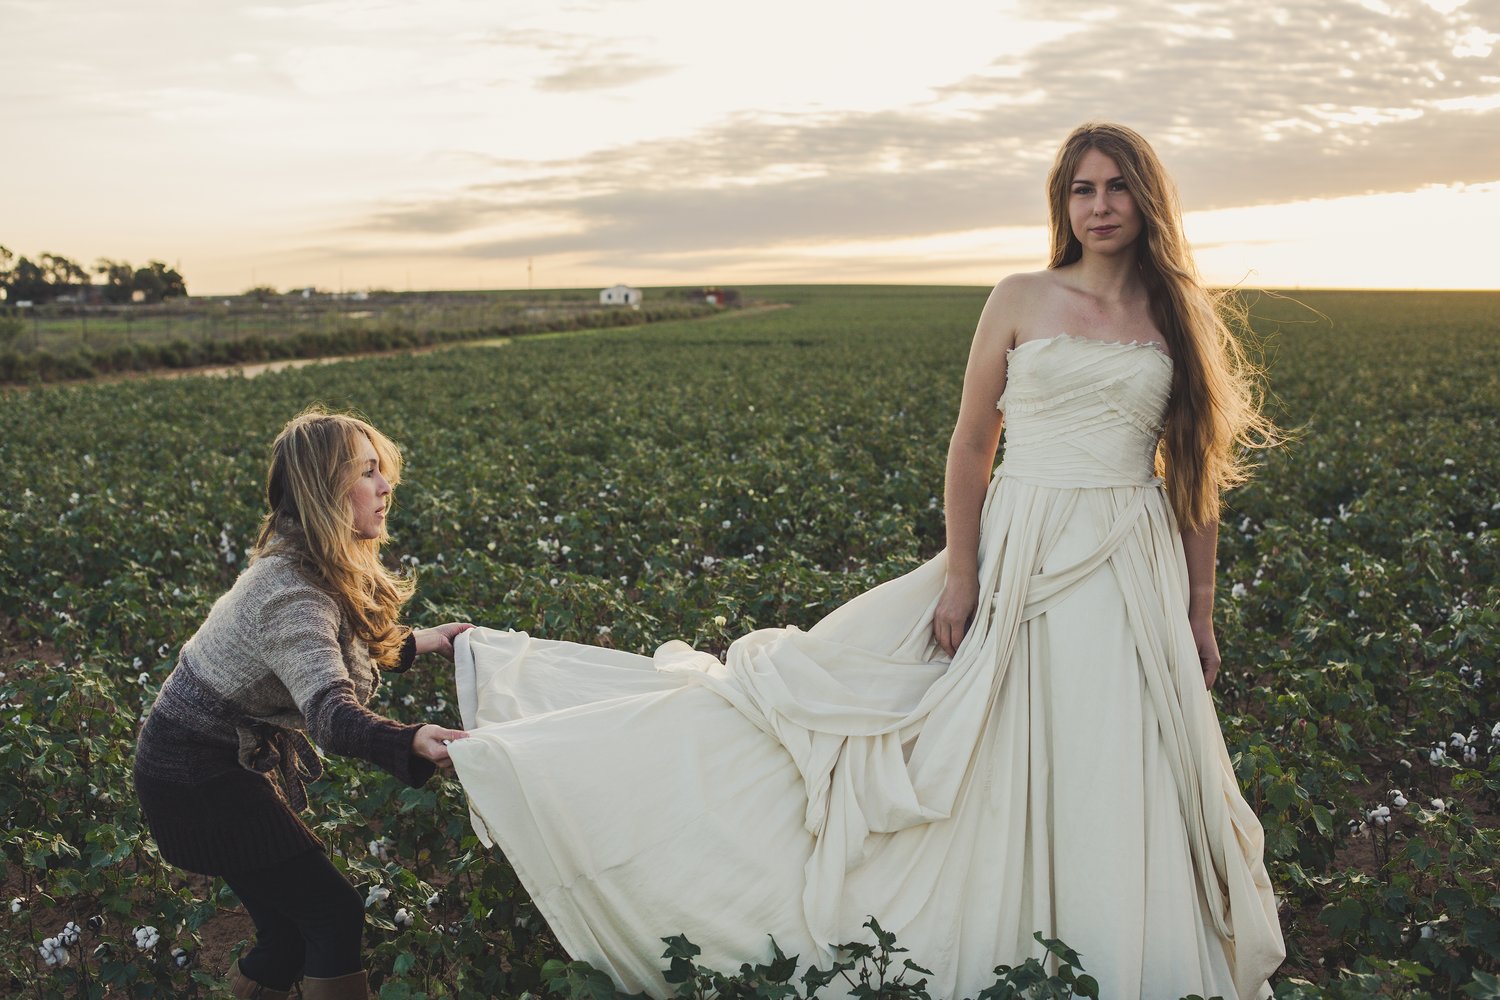  Texas.&nbsp;Sunrise.&nbsp;Organic cotton field. Perfect backdrop for Lindee and her Aubrey dress. &nbsp; | Photo by Rachel Veale 